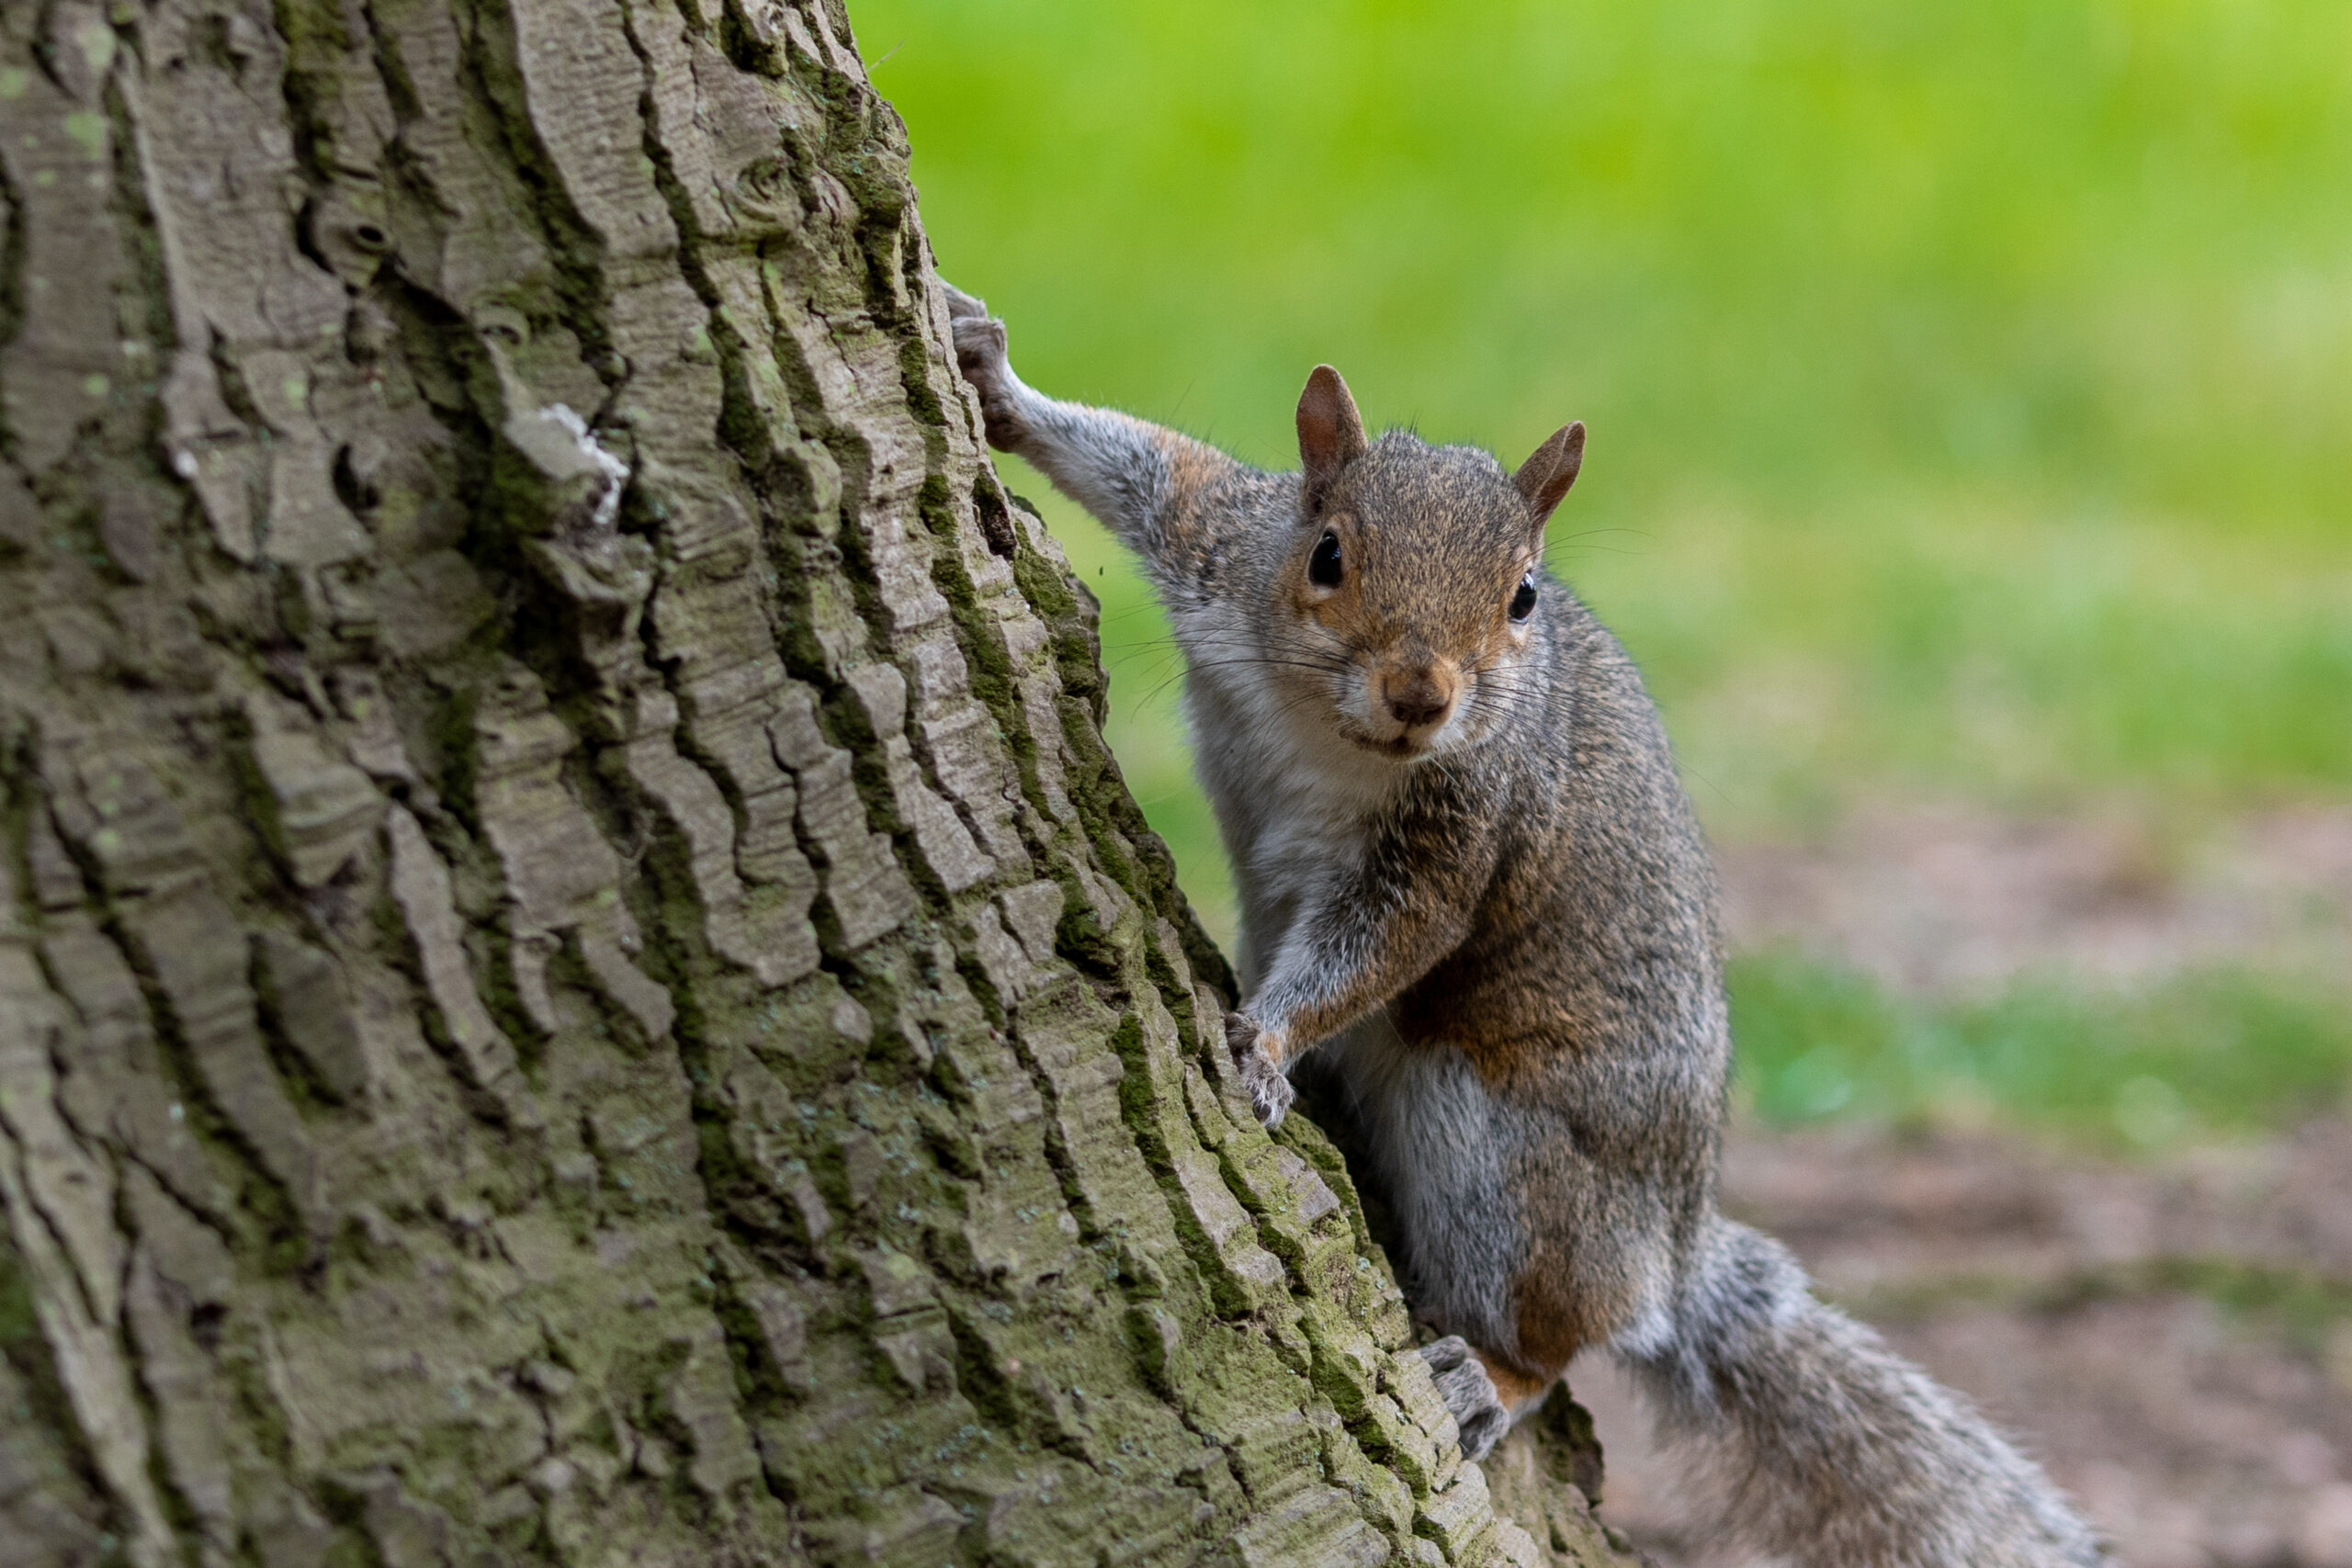 A portrait of a common grey squirrel looking at the camera.